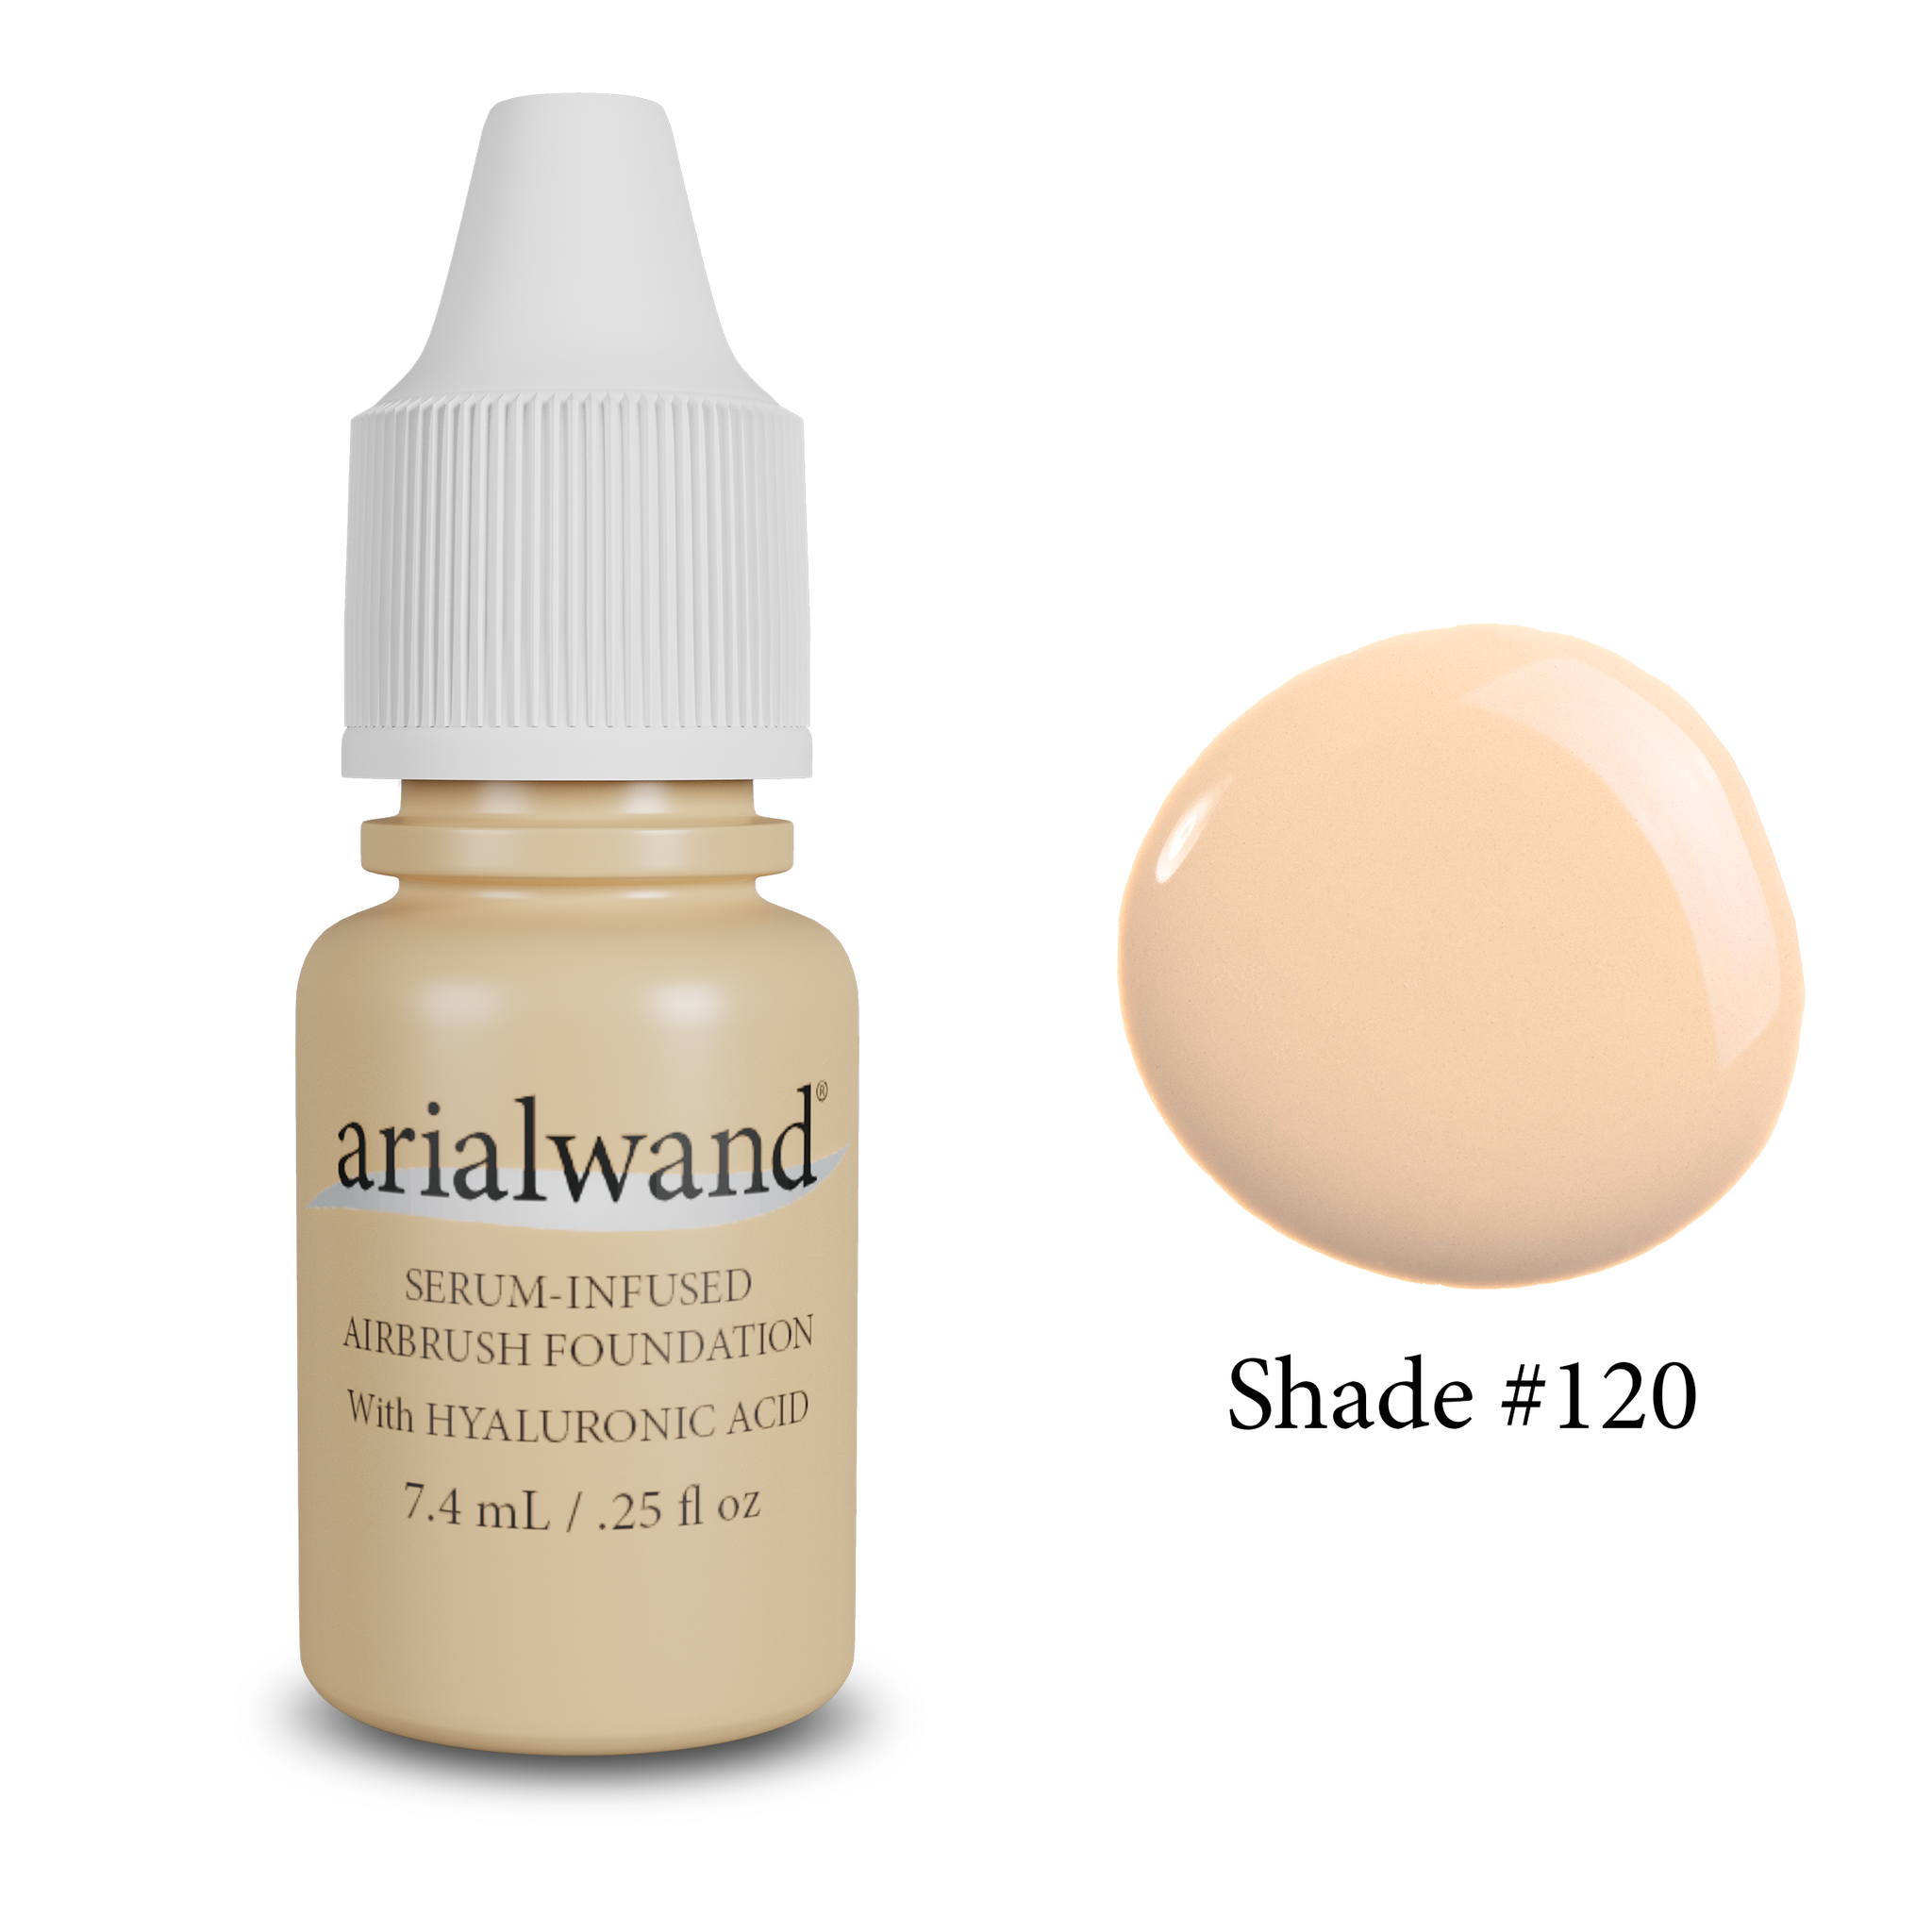 Shade 120, Airbrush Foundation with Hyaluronic Acid